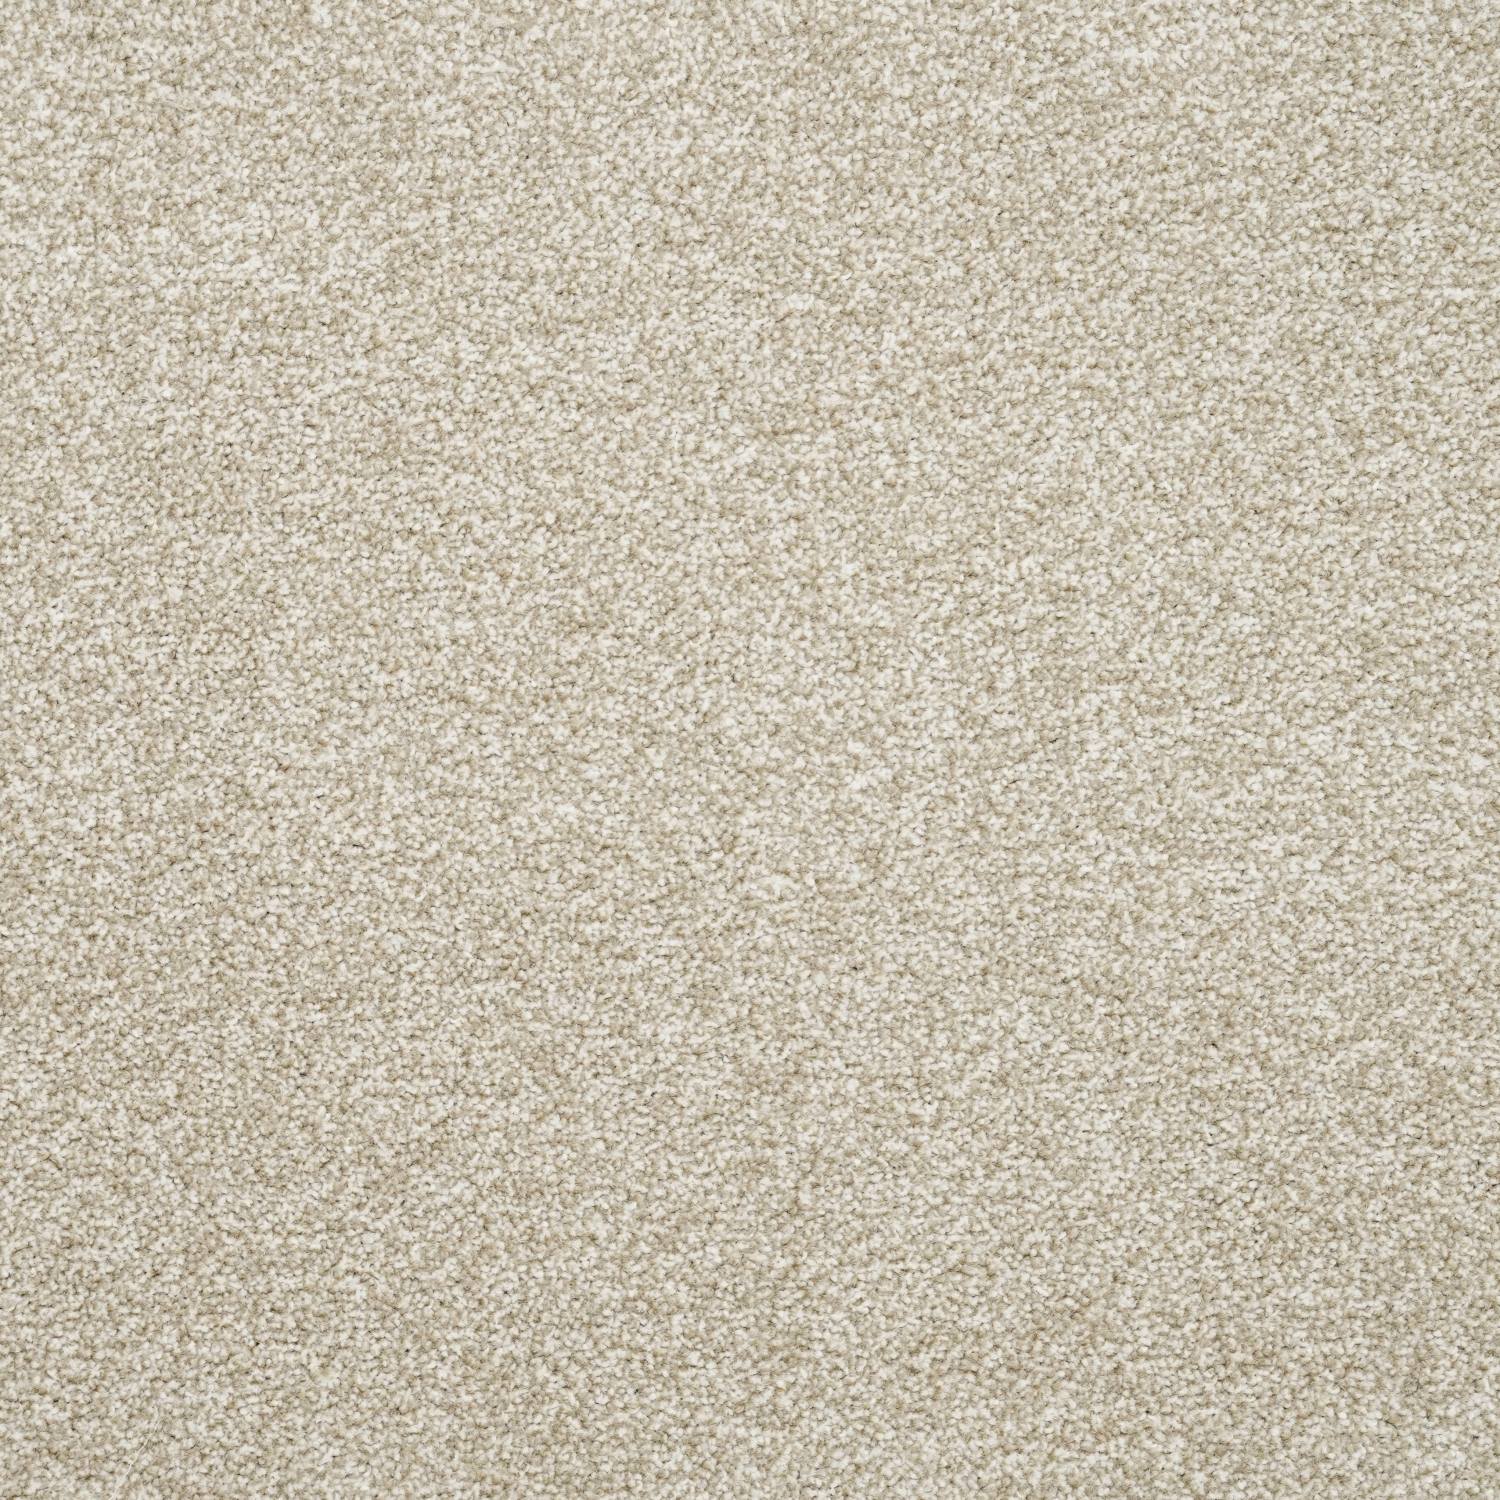 Avondale Heathers Recycled Twist Carpet - 1889 Risotto